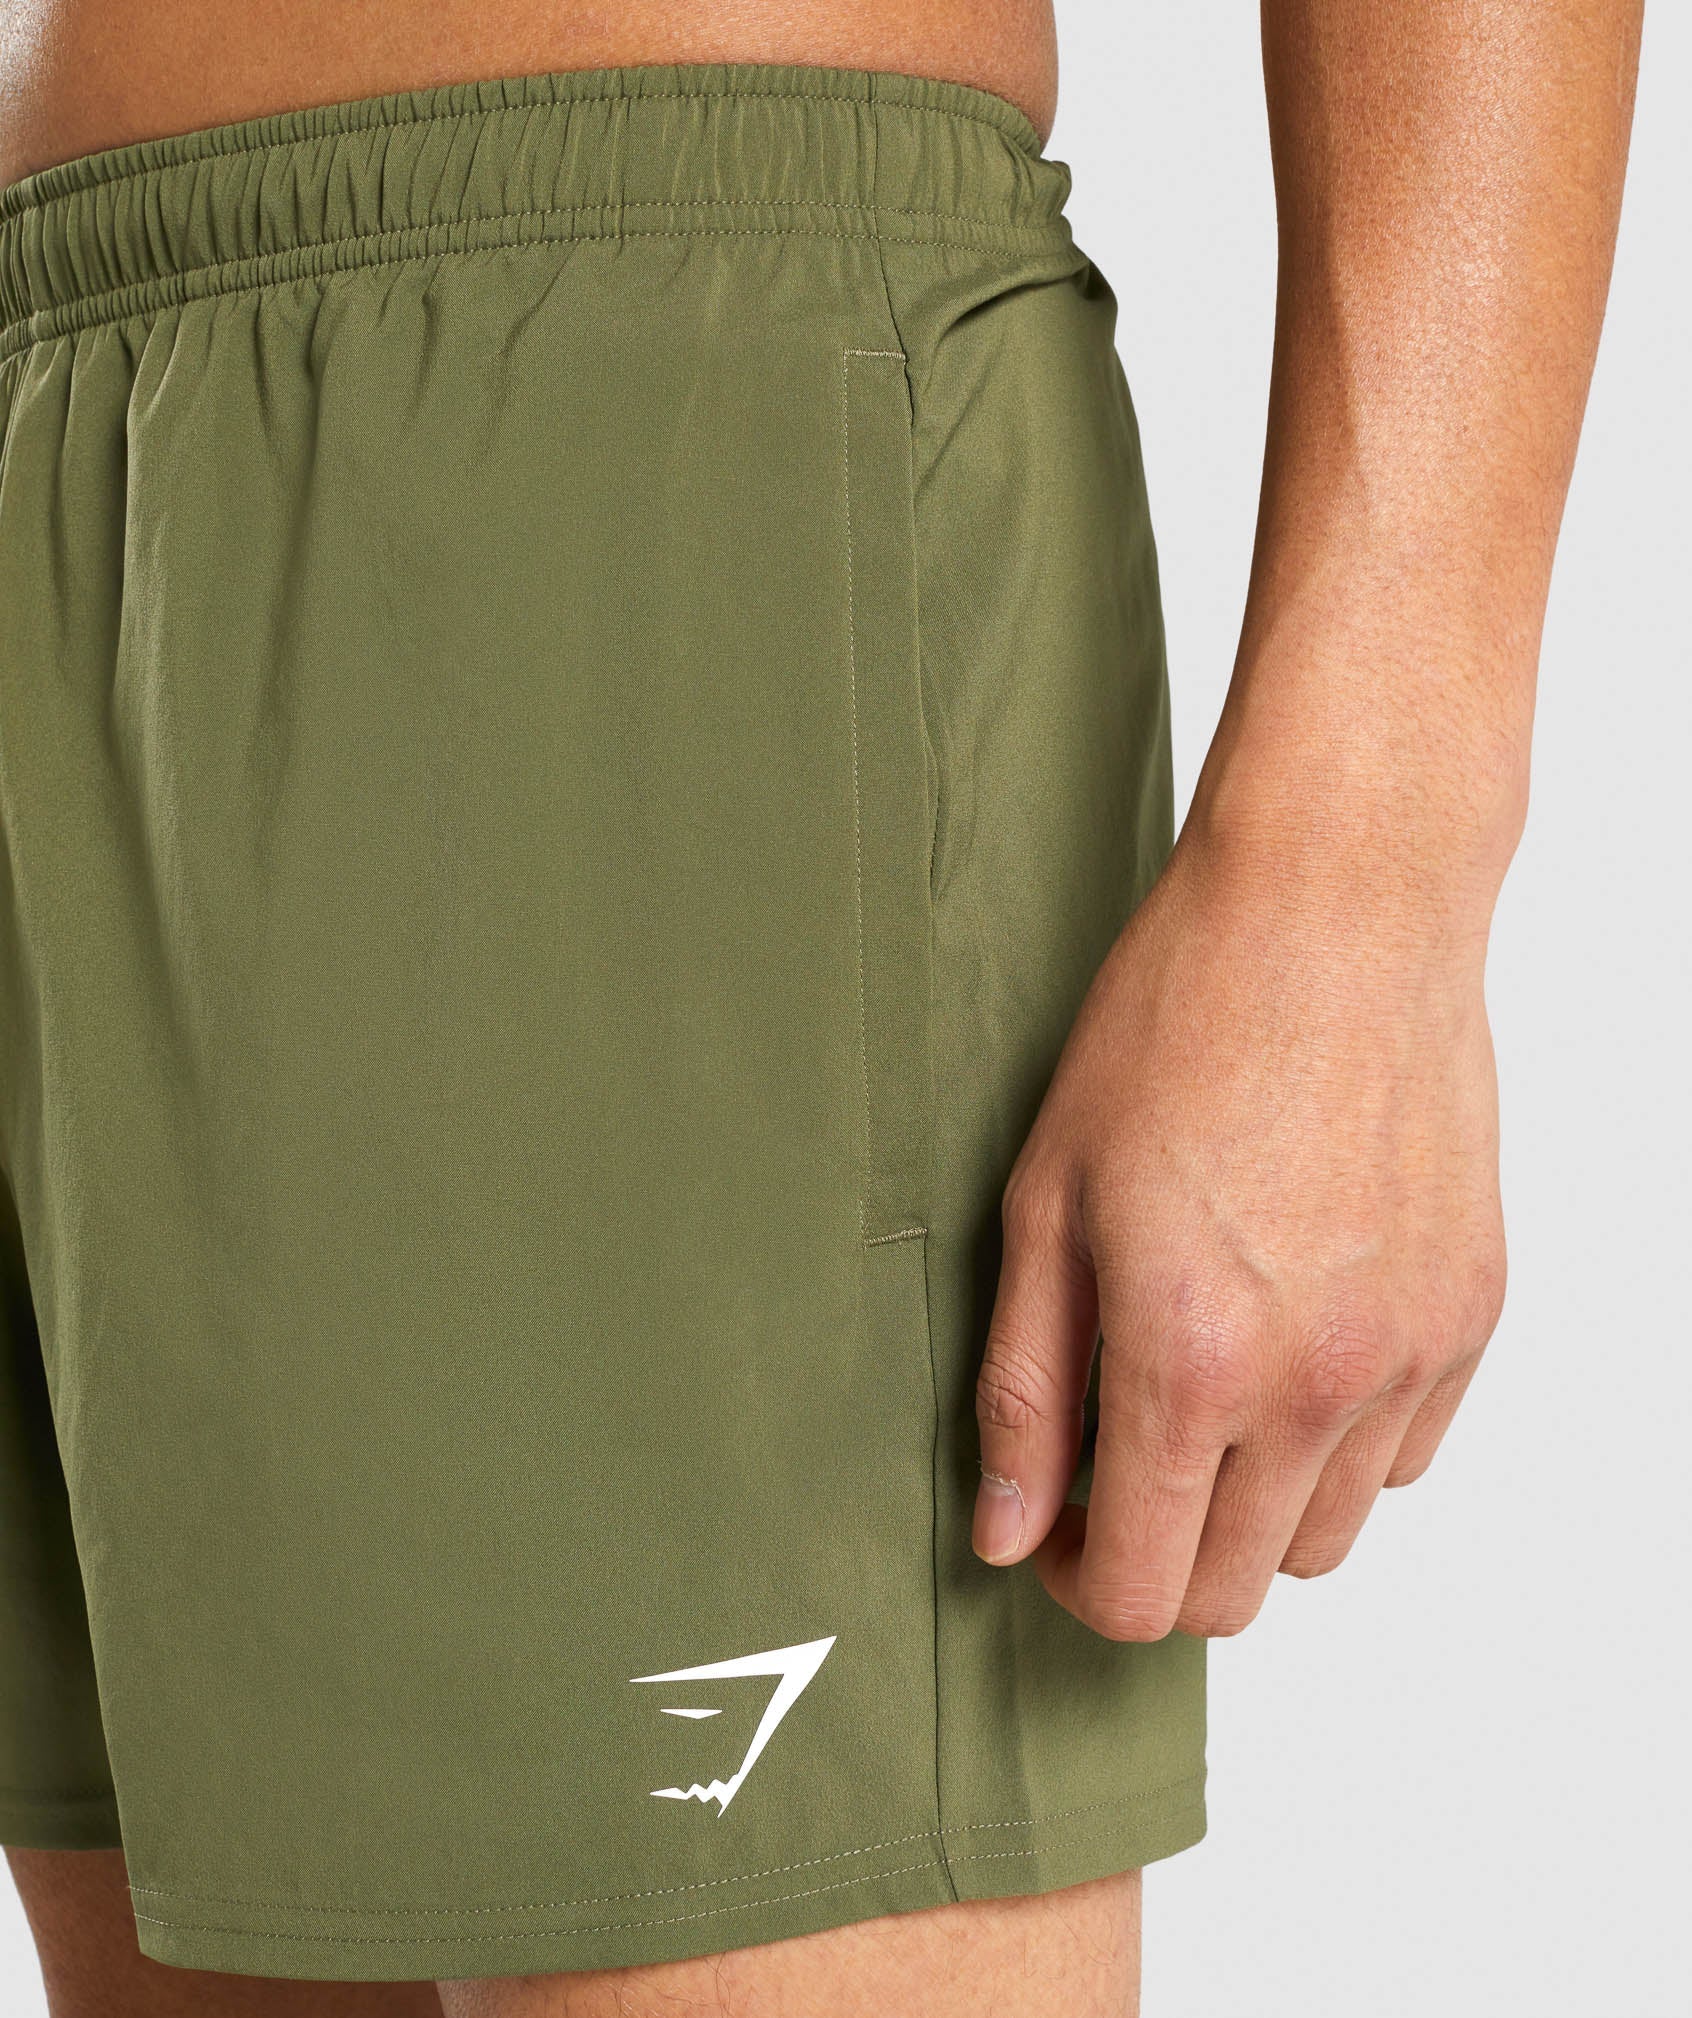 Arrival 5" Shorts in Dark Green - view 5